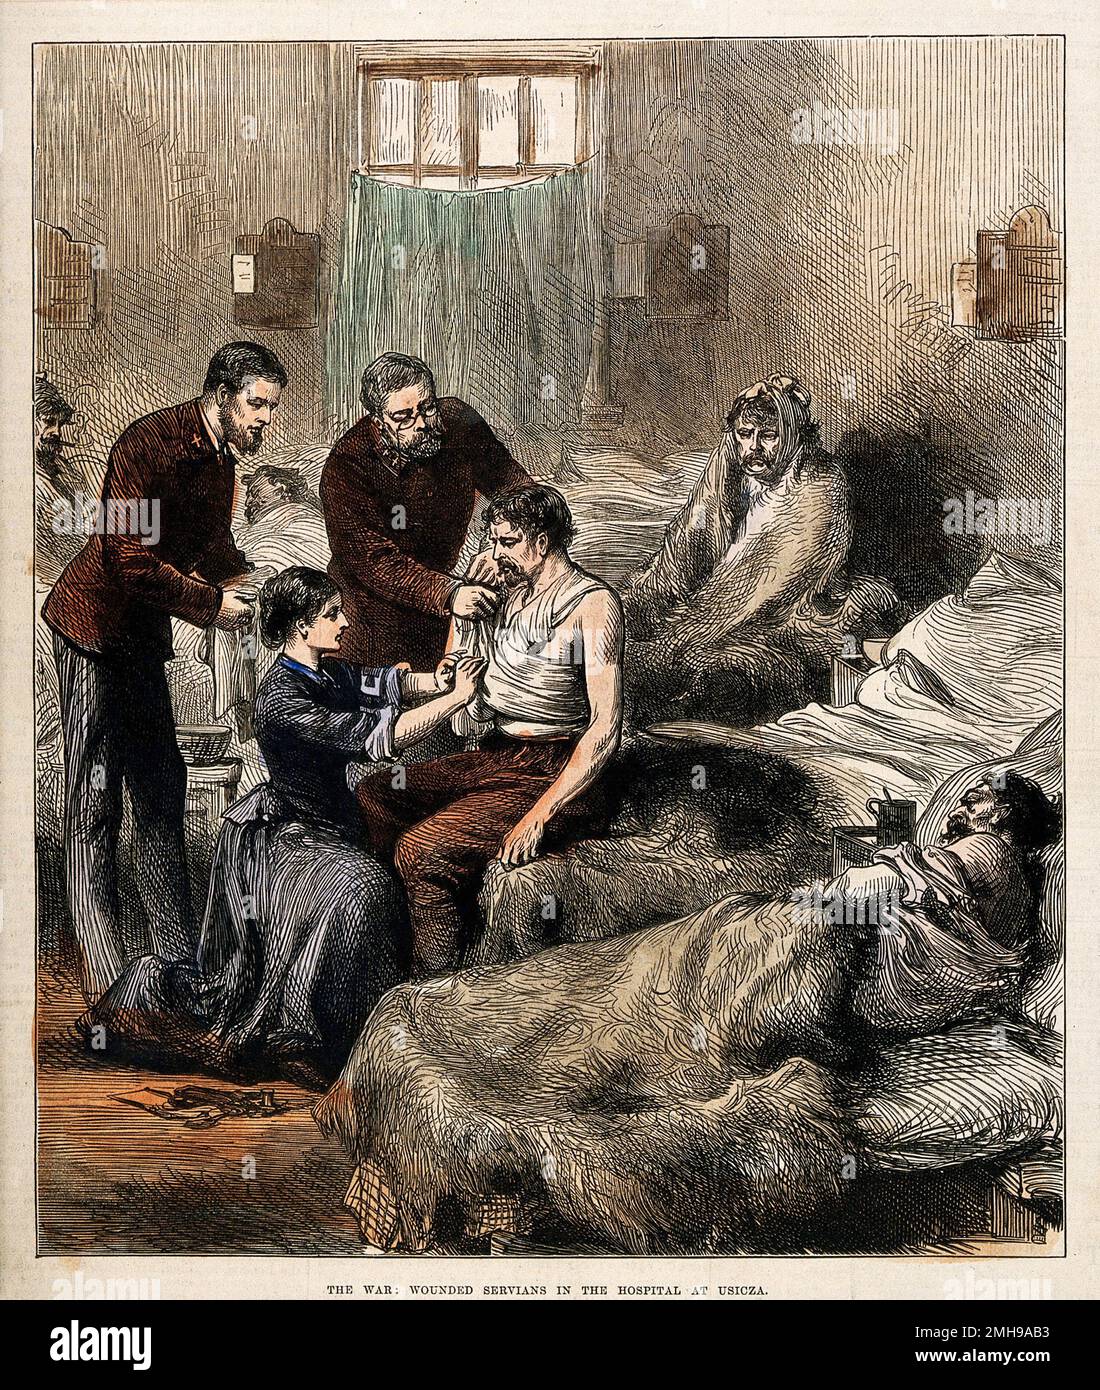 Coloured wood engraving.of a nurse treating wounded servians in an Usicza hospital during the  Franco-Prussian War or Franco-German War, often referred to in France as the War of 1870, a conflict between the Second French Empire and the North German Confederation led by the Kingdom of Prussia, lasting from 19 July 1870 to 28 January 1871. Stock Photo